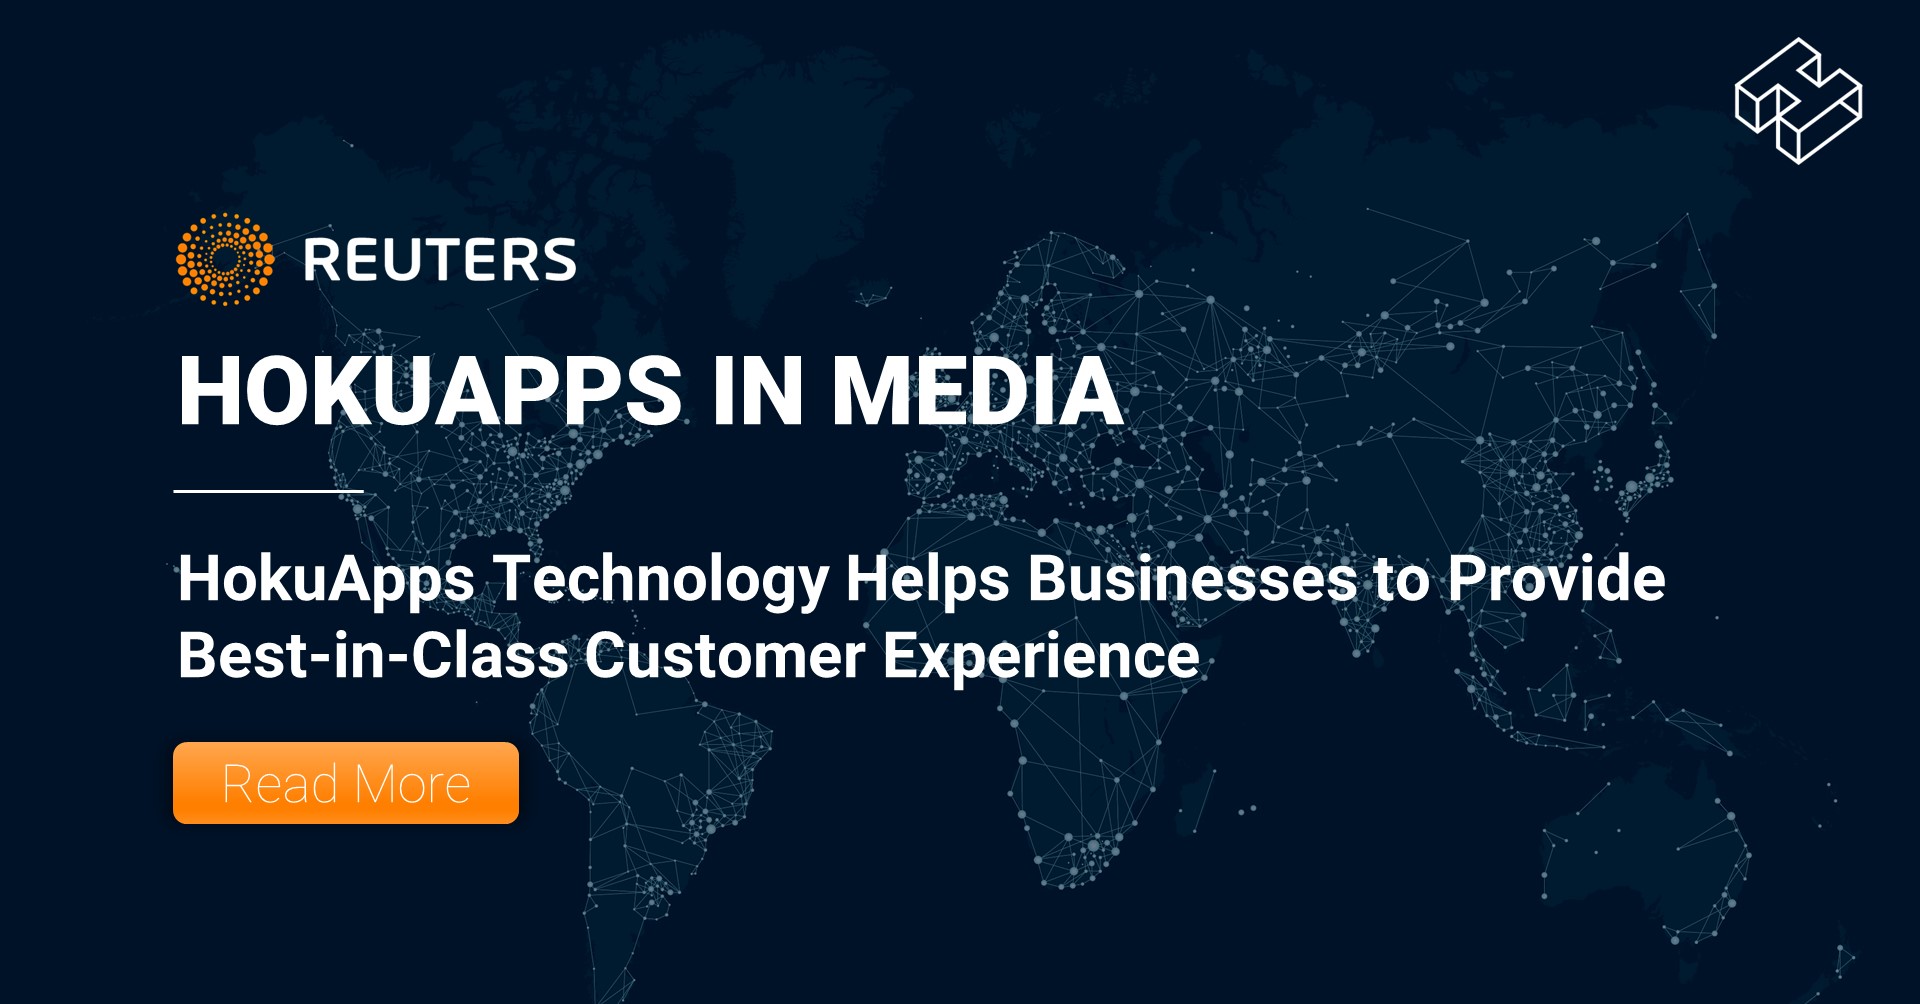 HokuApps Technology Helps Businesses to Provide Best-in-Class Customer Experience